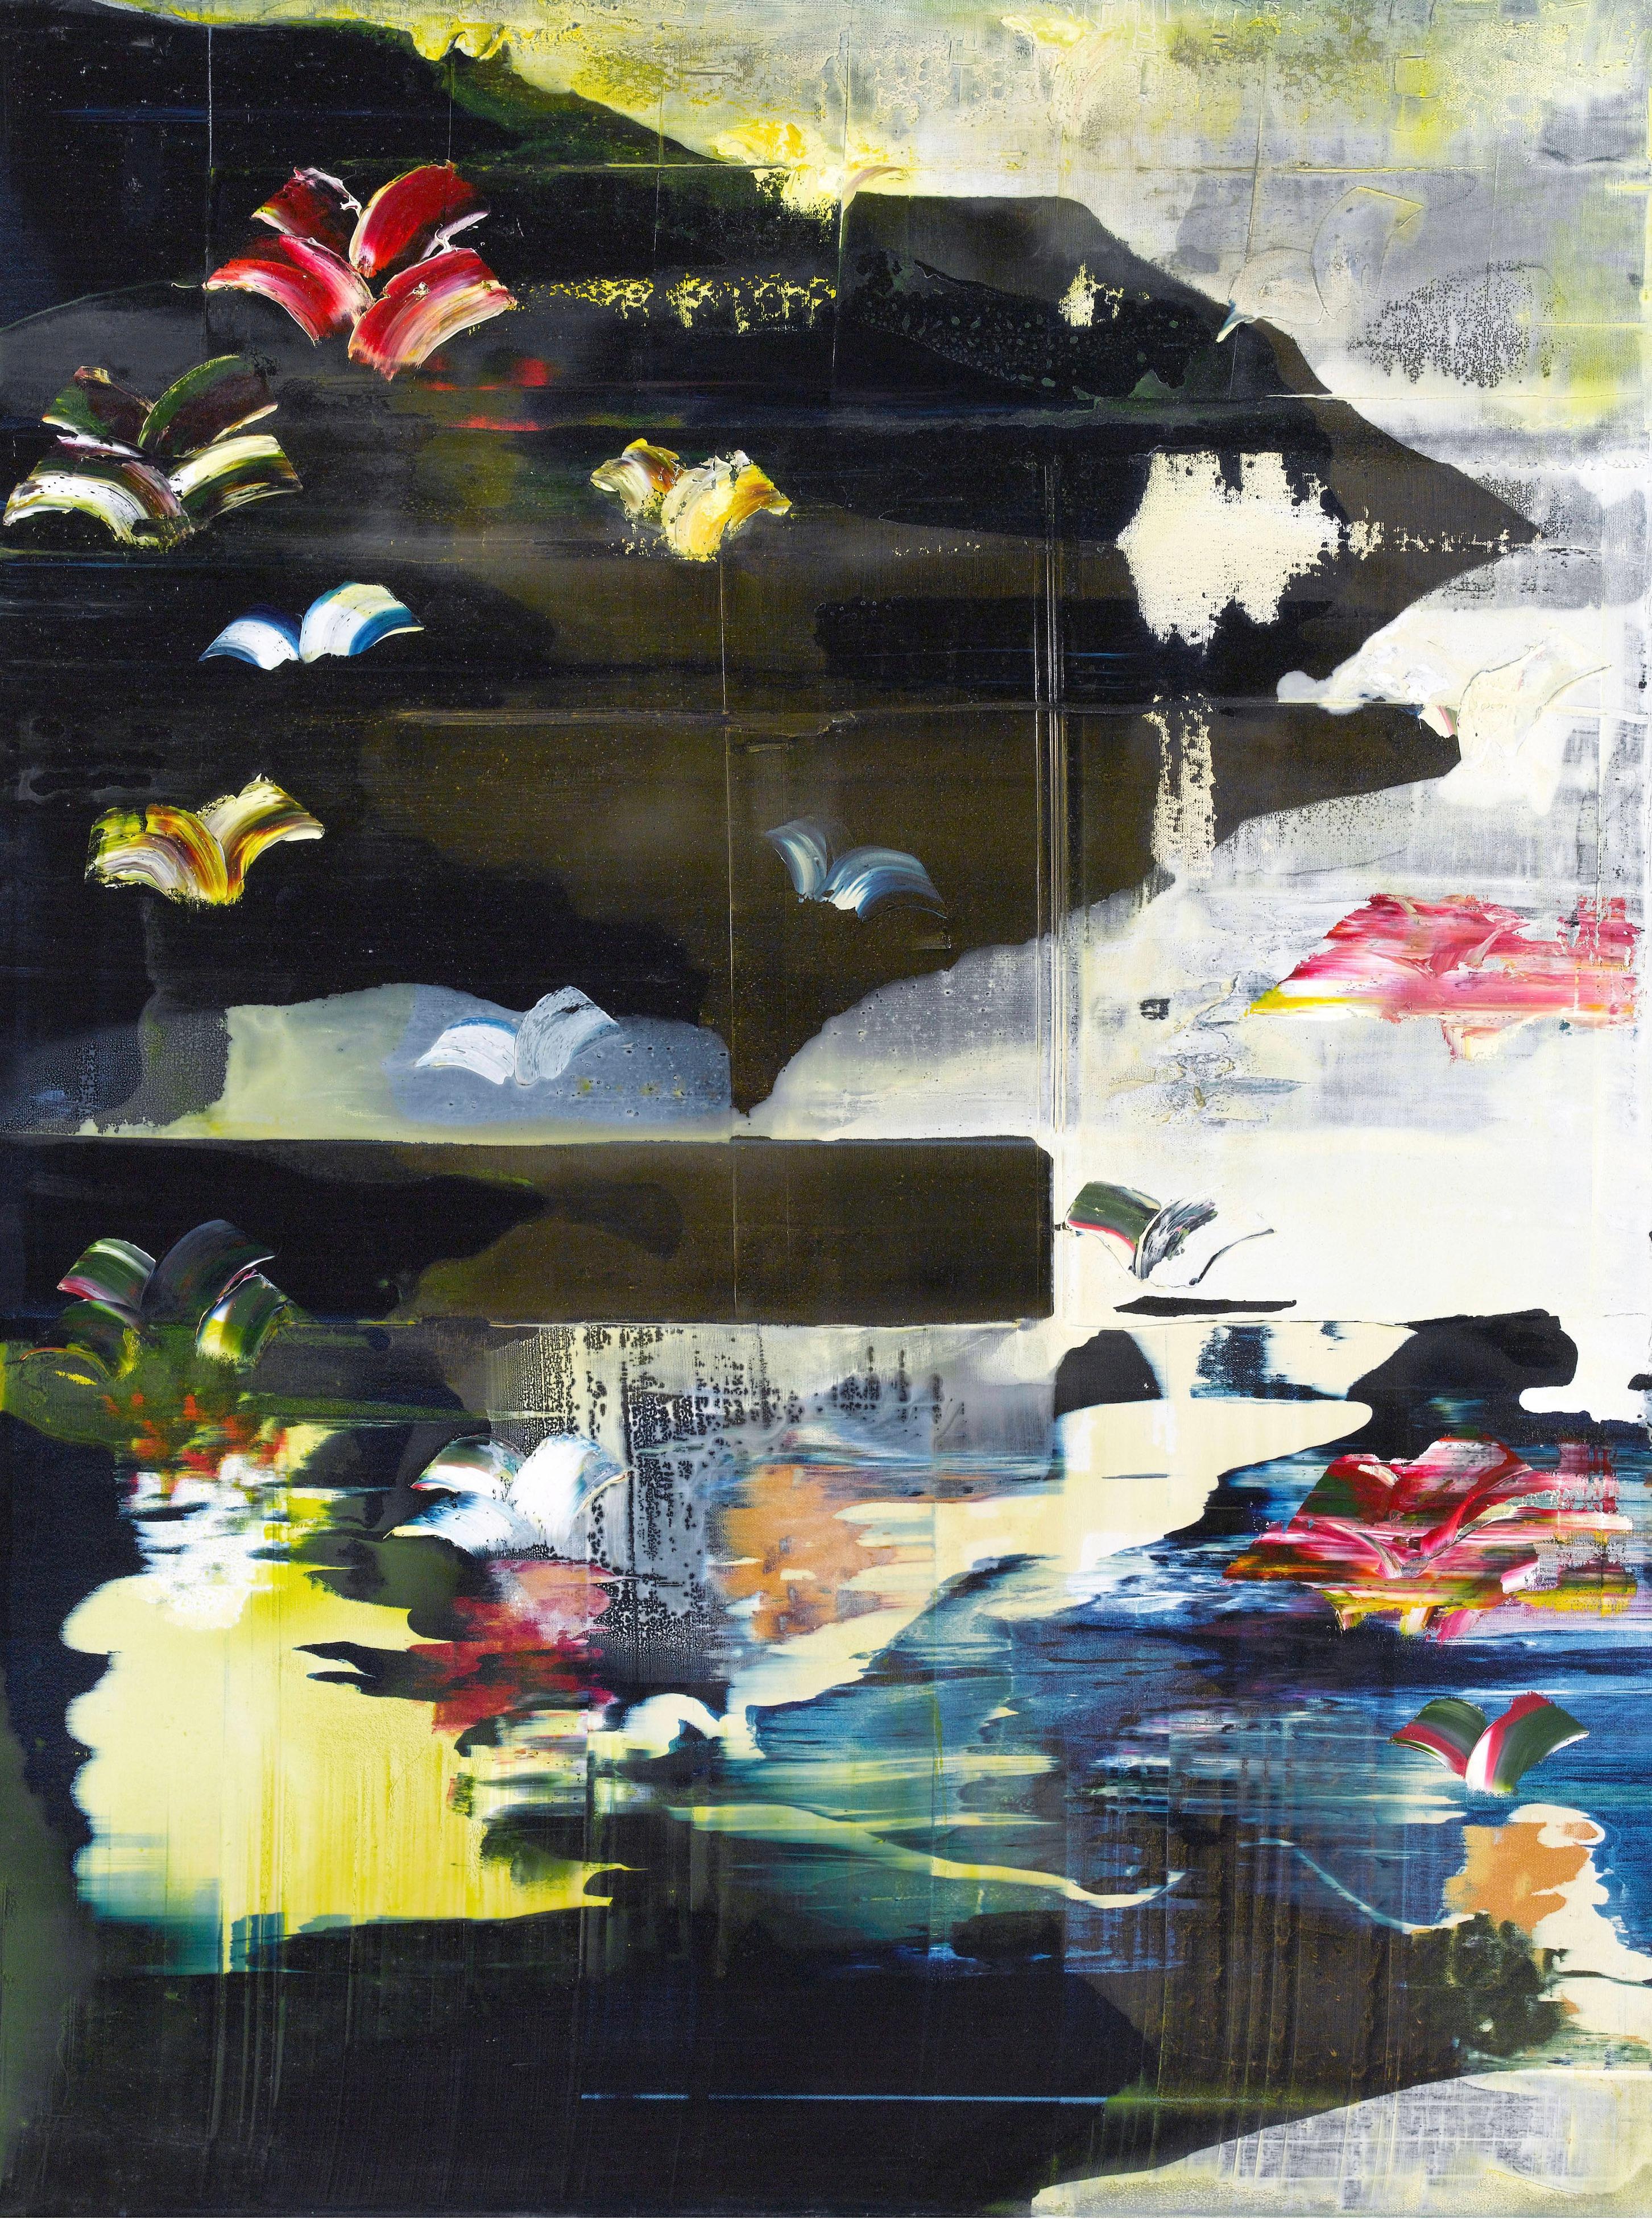 'Autumn Triptych' by British artist Jessica Zoob is a monumental work by the artist comprising three canvases each measuring H120cm x W90cm. Its impact is powerful, dynamic and energising. Even when there are storms in evidence, metaphors for the